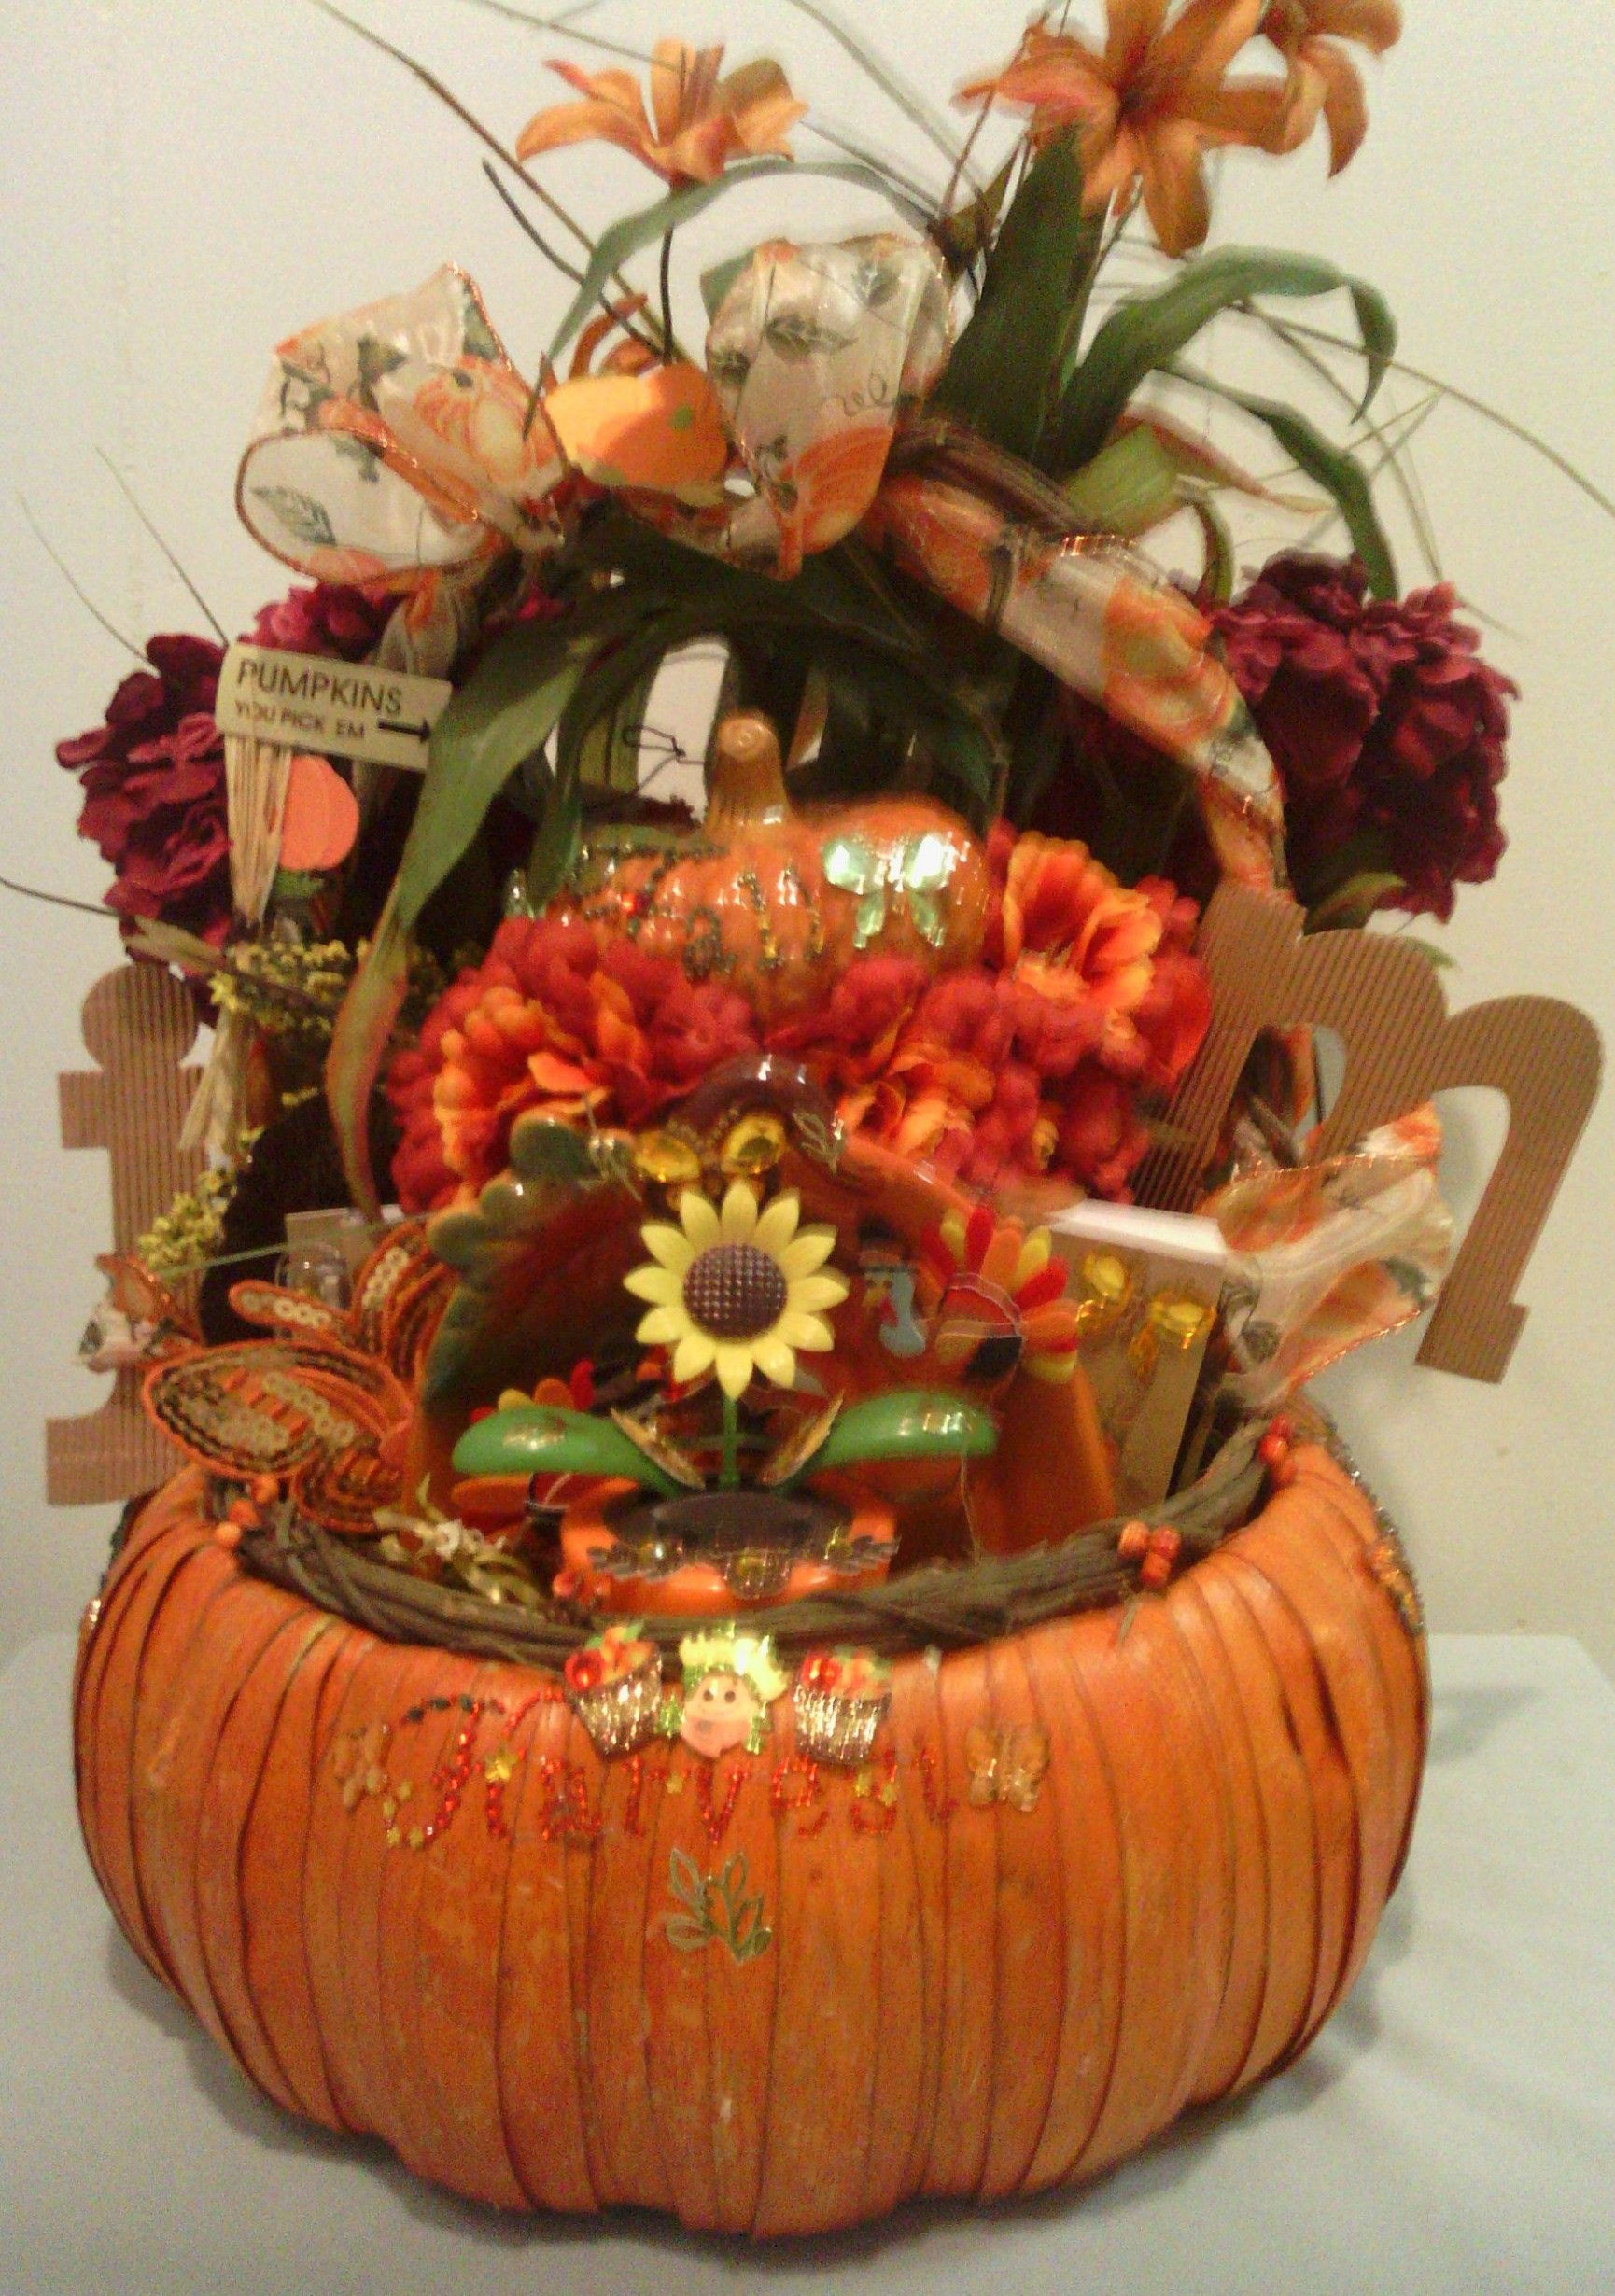 Gift Basket Decoration Ideas
 Here s another past Fall Gift Basket decoration where the